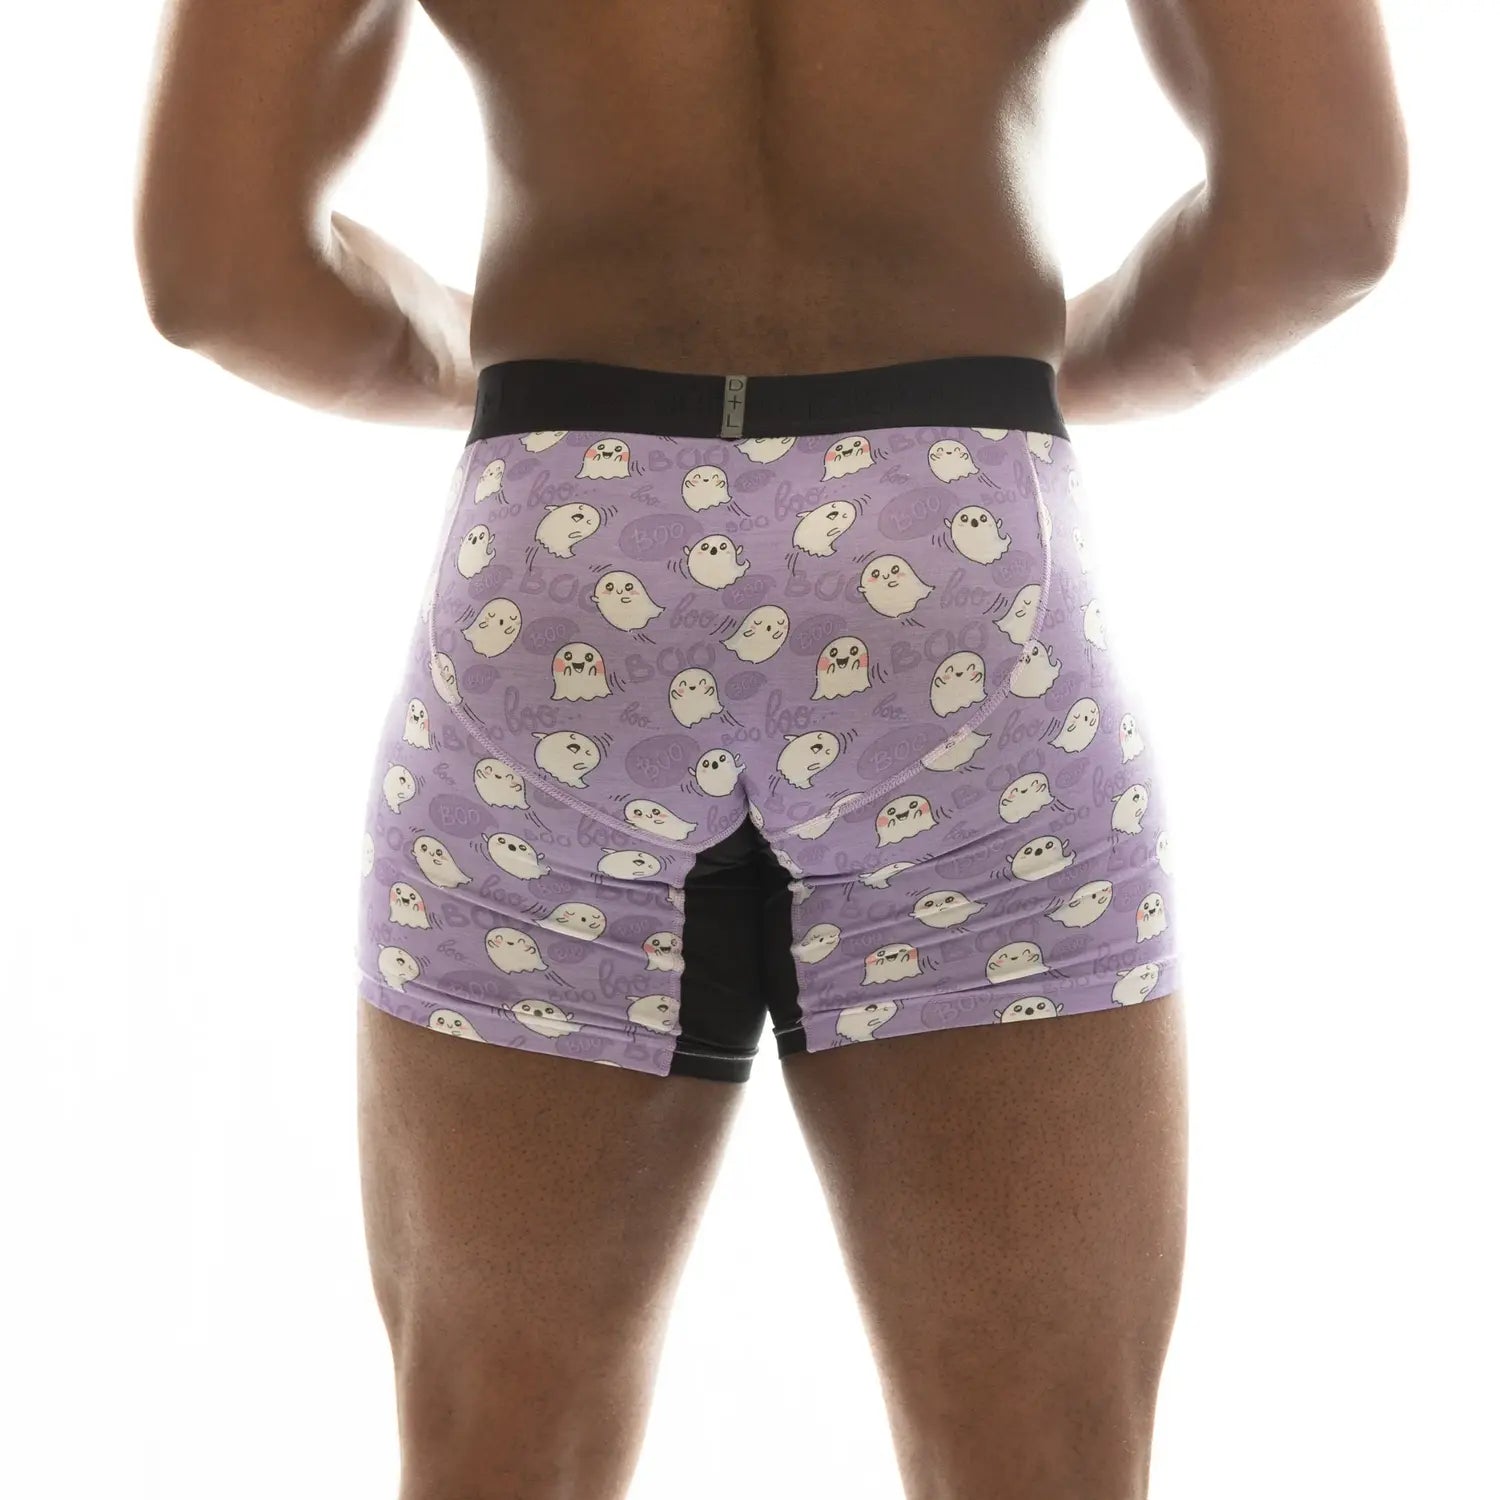 Journey Boxer Brief - Cute Ghosts